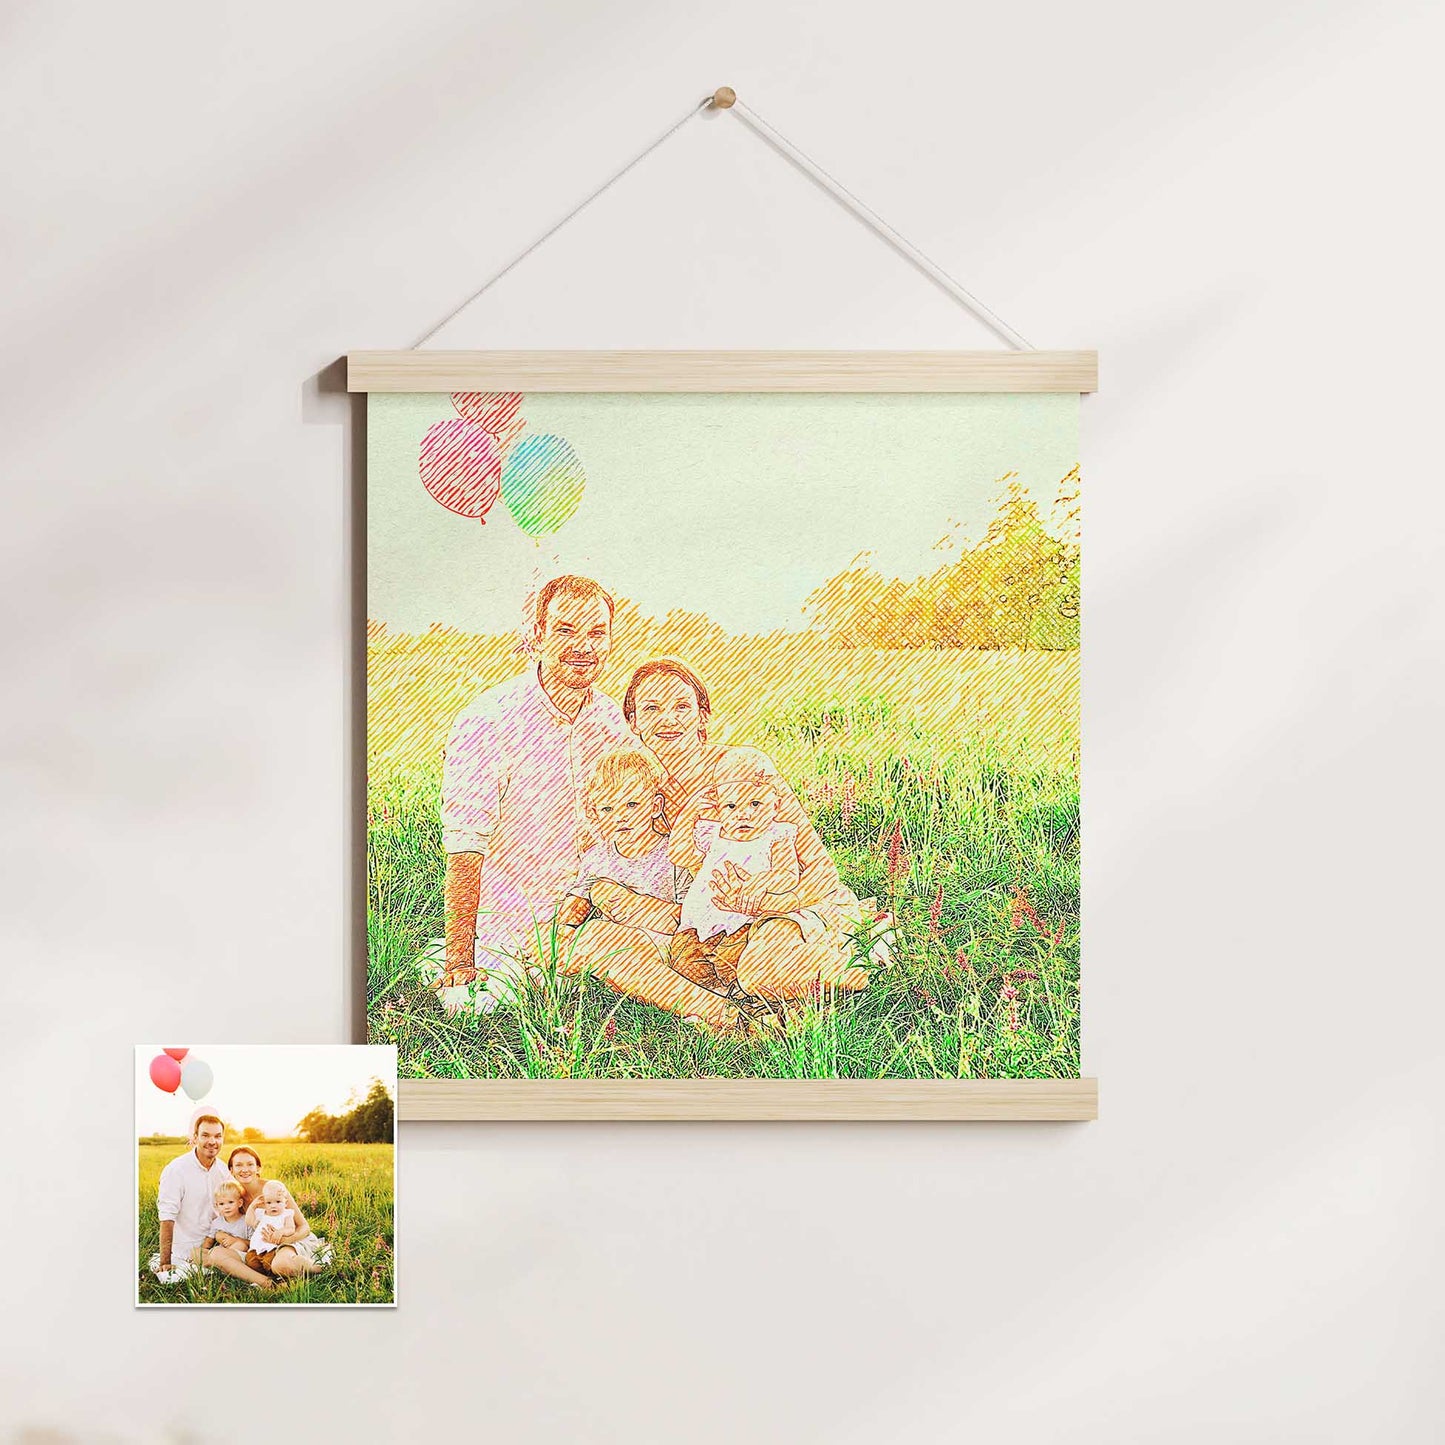 Crosshatch Texture Effect: Add a unique and creative touch to your home decor with the crosshatch texture effect. Our Personalised Drawing Crosshatch Poster Hanger combines vibrant colors, joy, and cheer to create an inspirational print